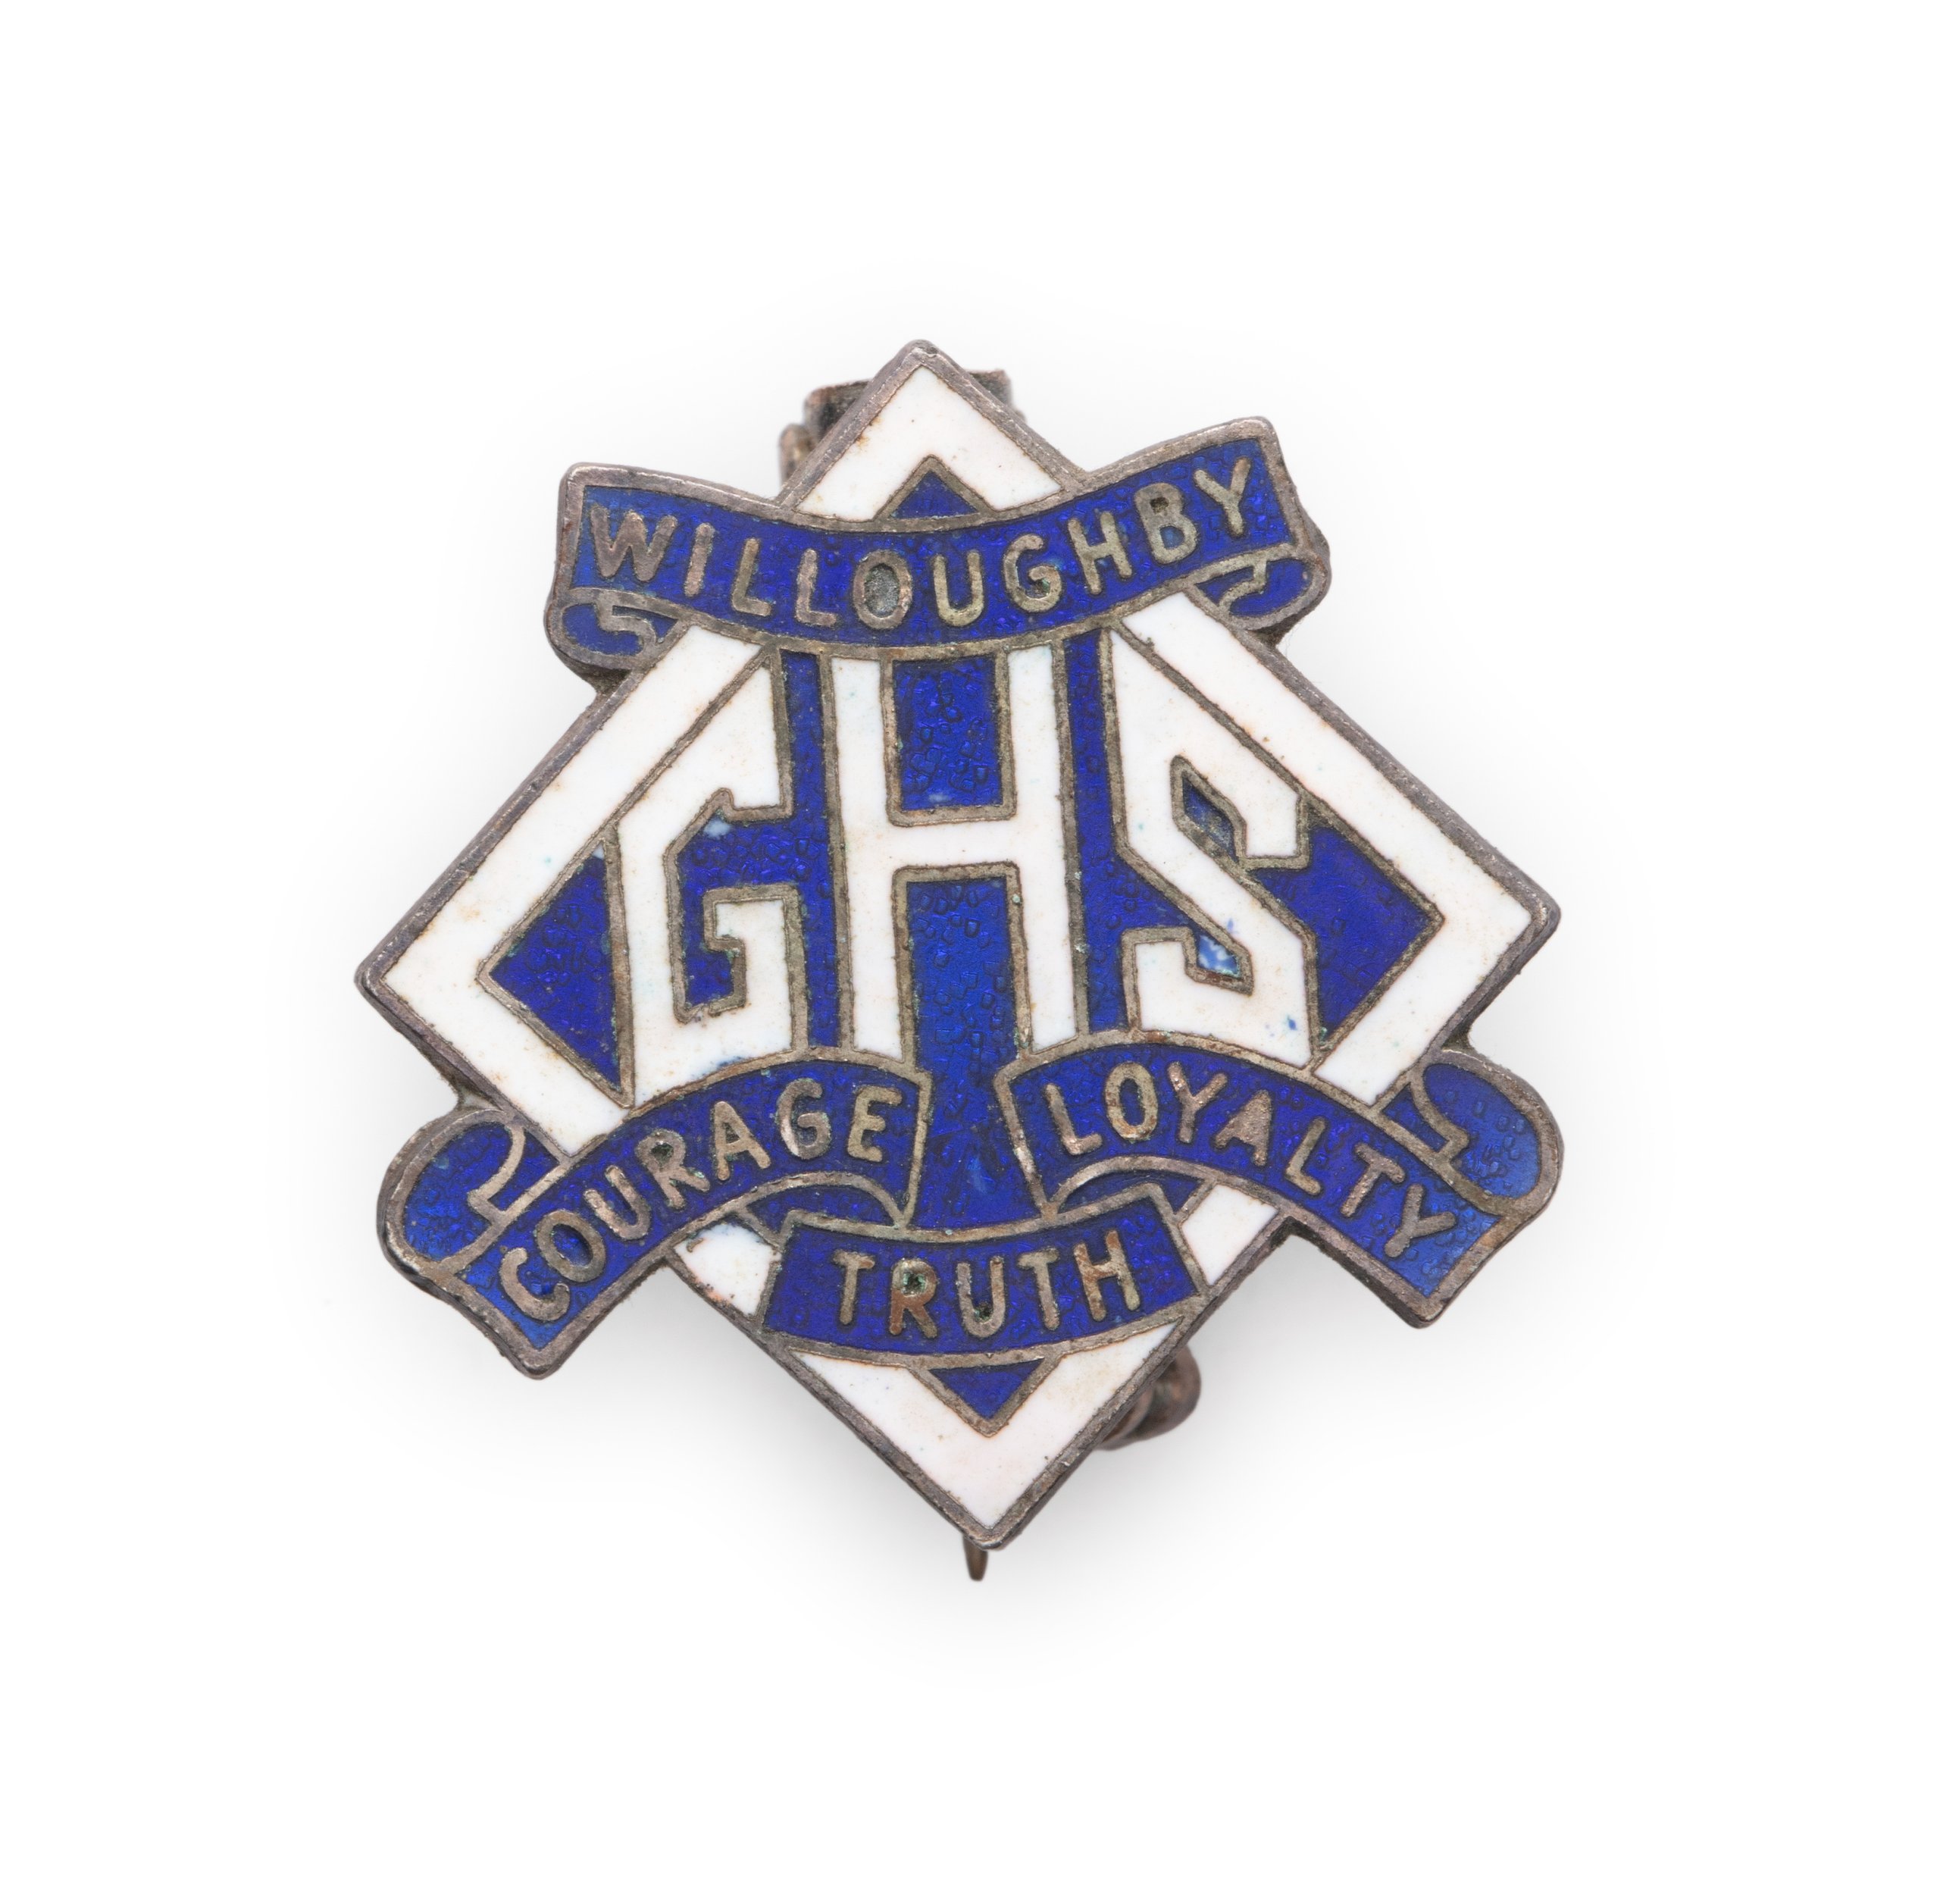 'Courage Truth Loyalty' school badge